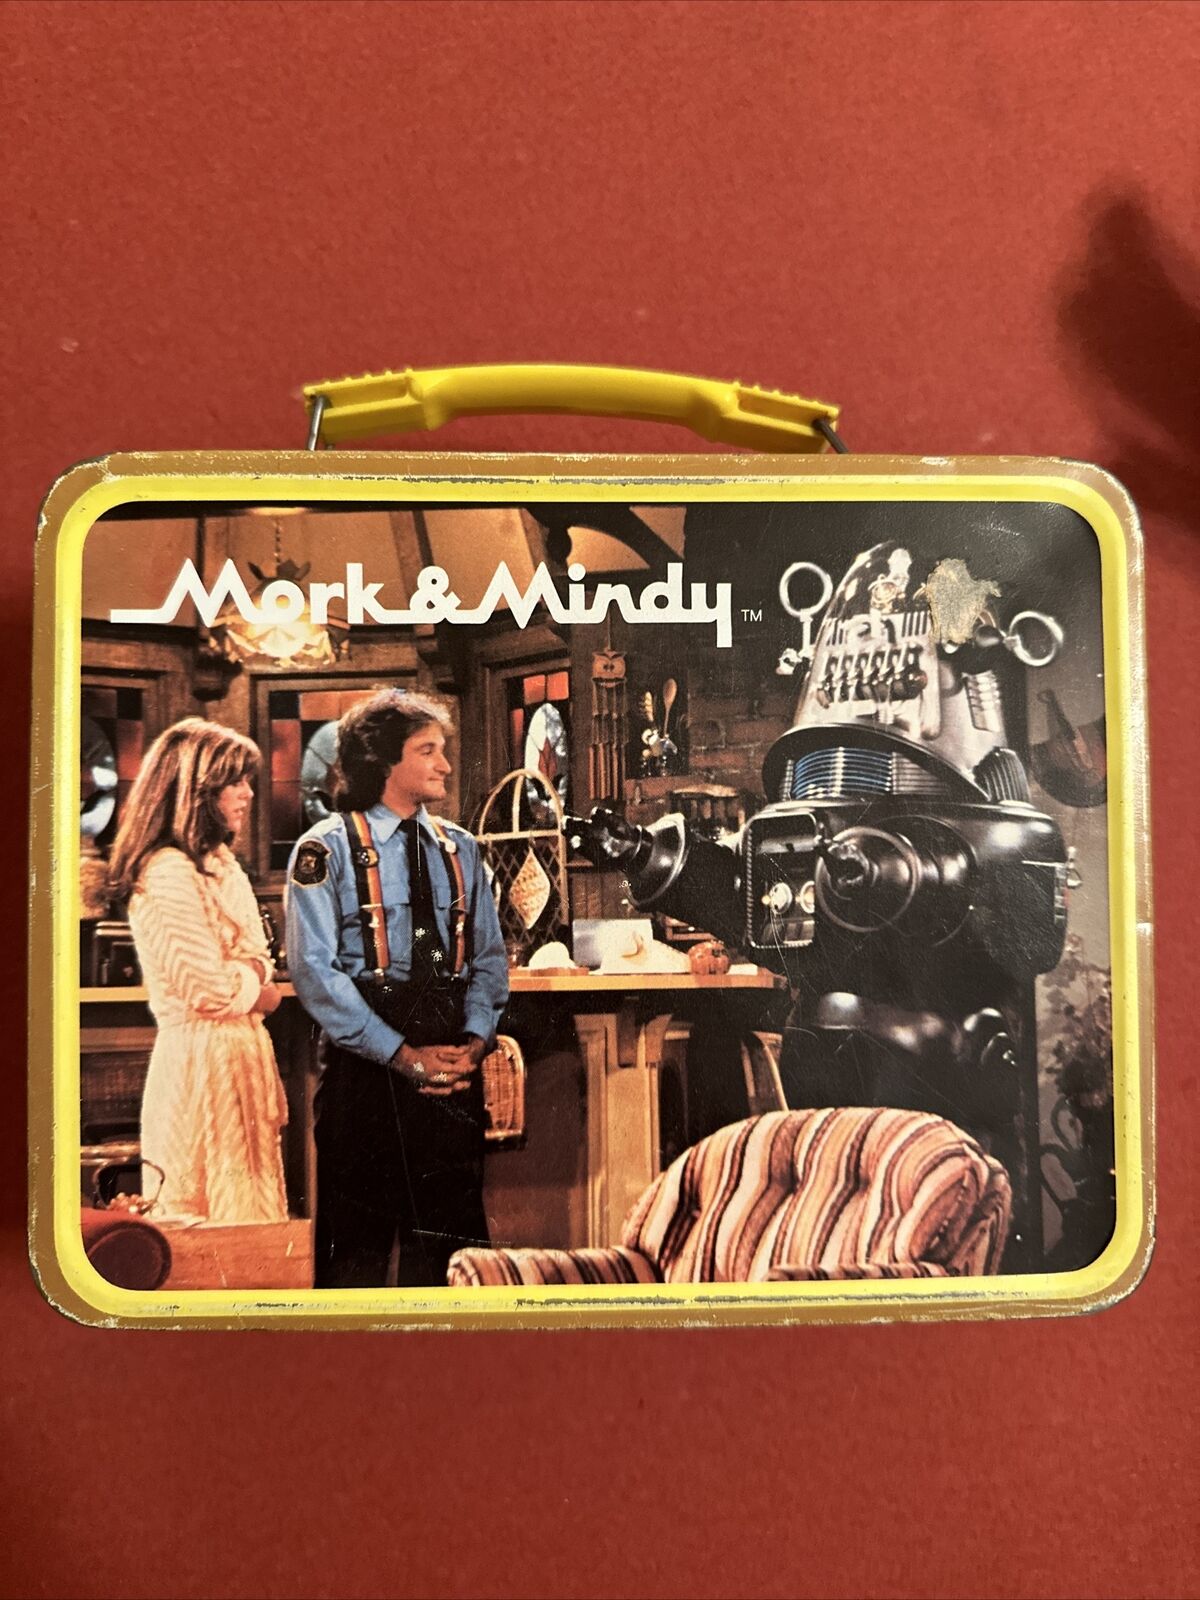 Vintage Mork and Mindy Lunchbox 1979 Metal Rare By Thermos